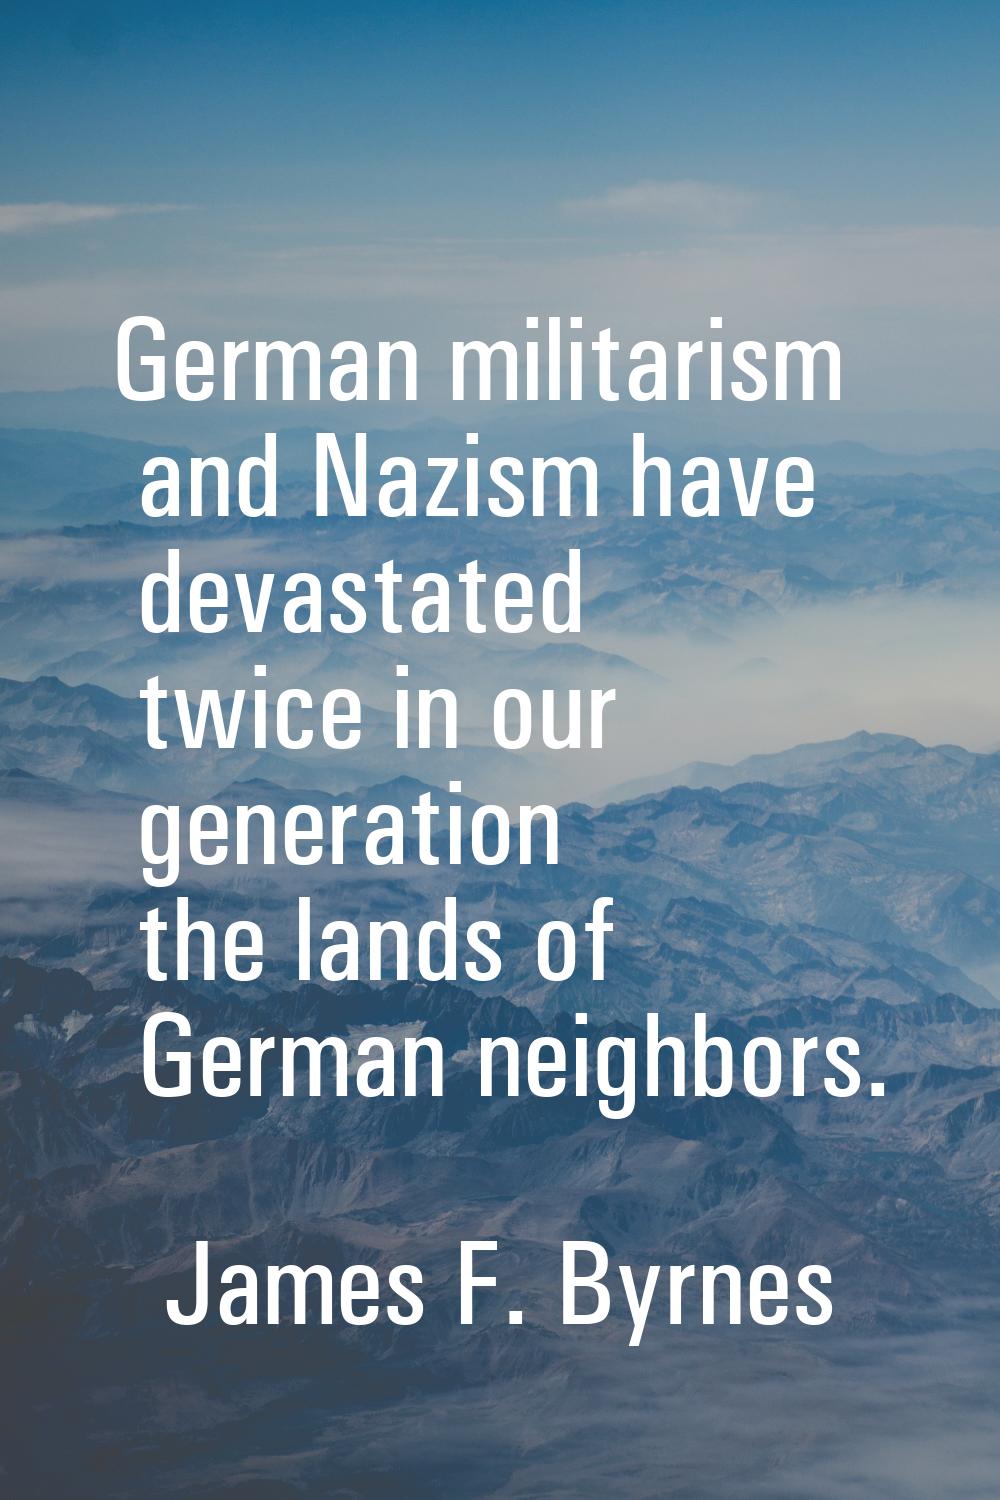 German militarism and Nazism have devastated twice in our generation the lands of German neighbors.